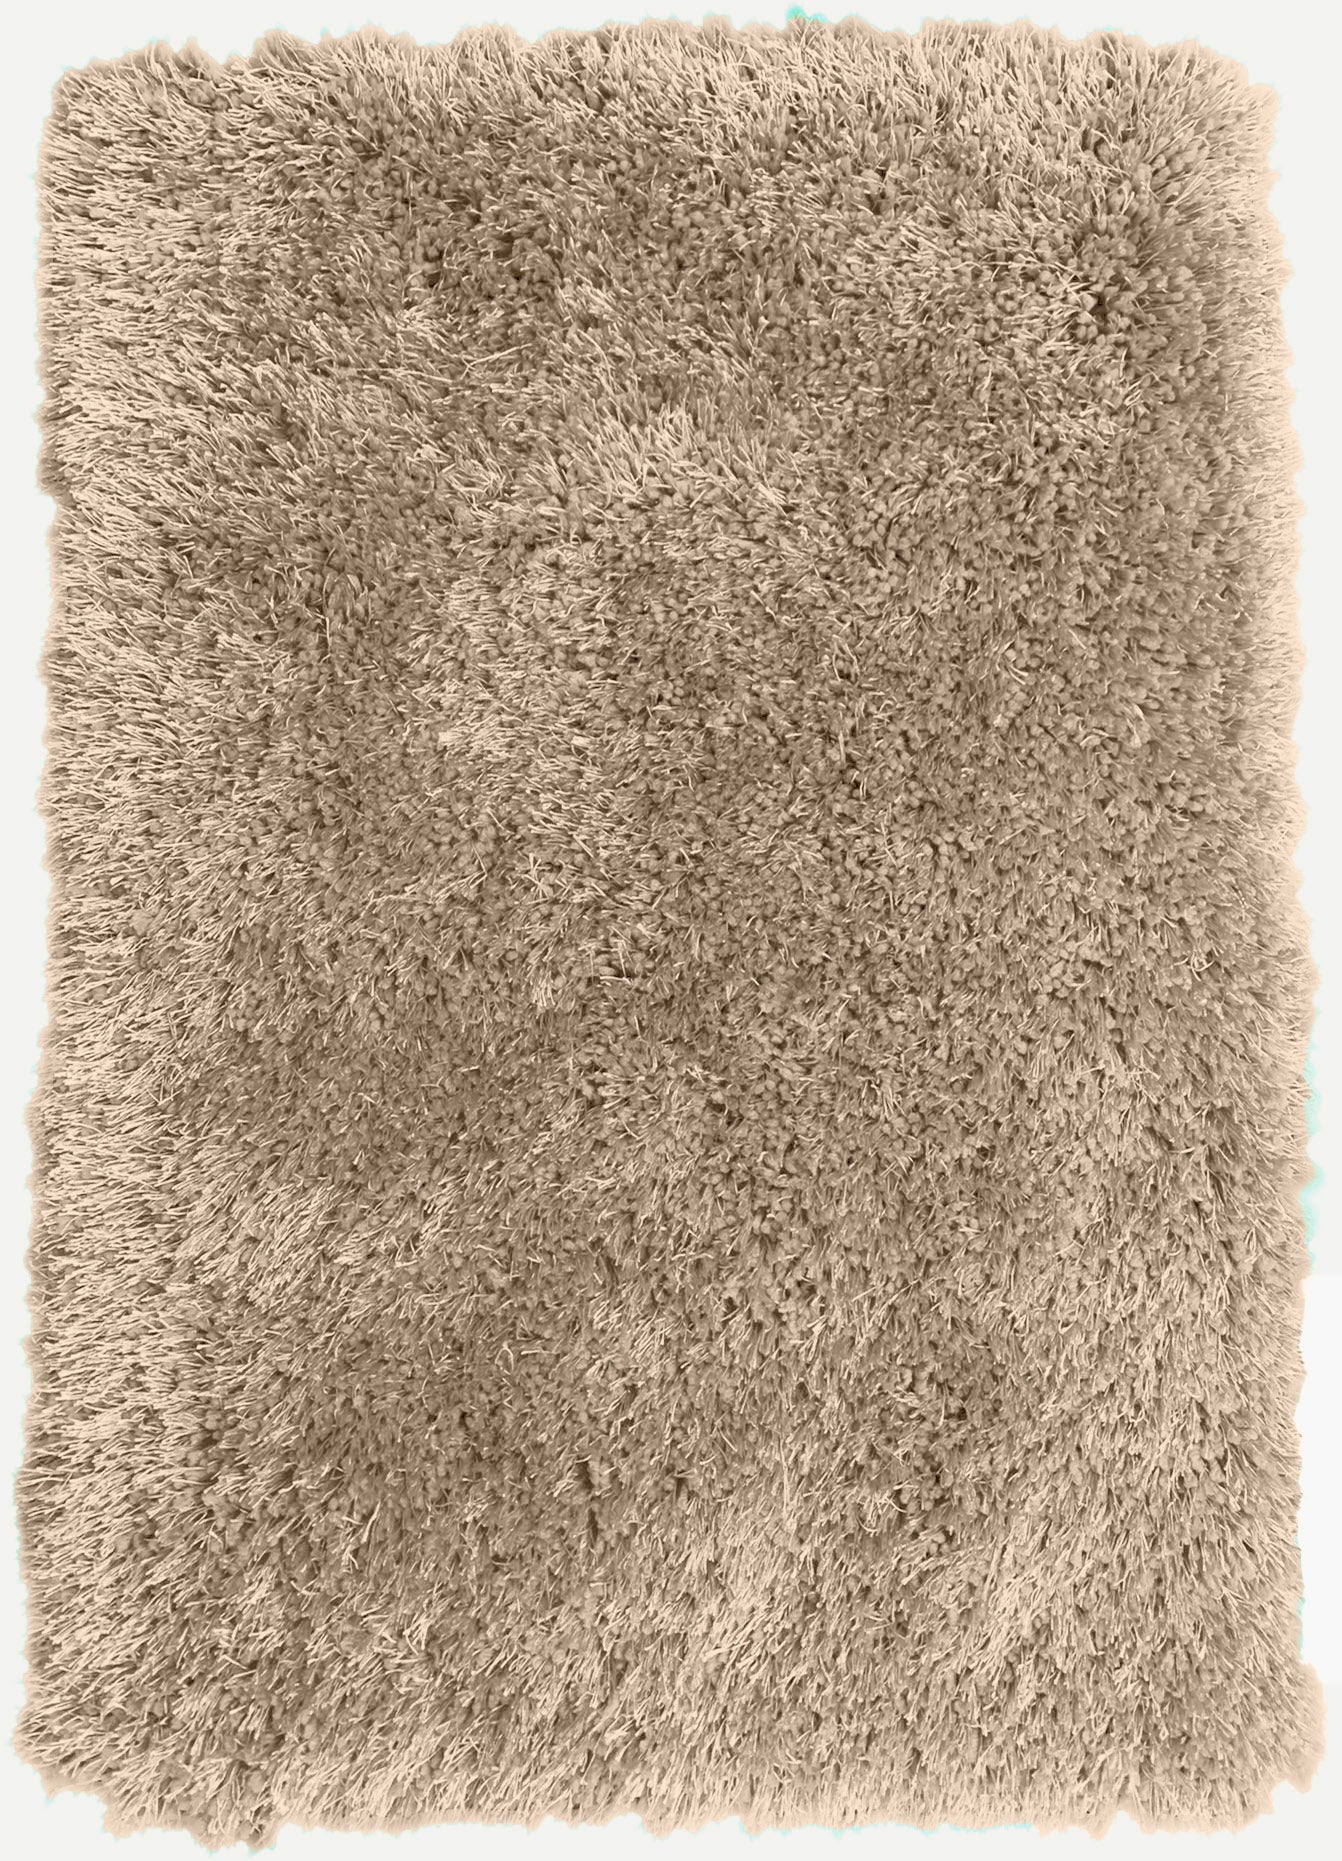 Beige Solid Shag Area Rug/Carpet - Crafted from 100% Polyester, Plush Fluffy Shine, Thick and Thin Yarns Design